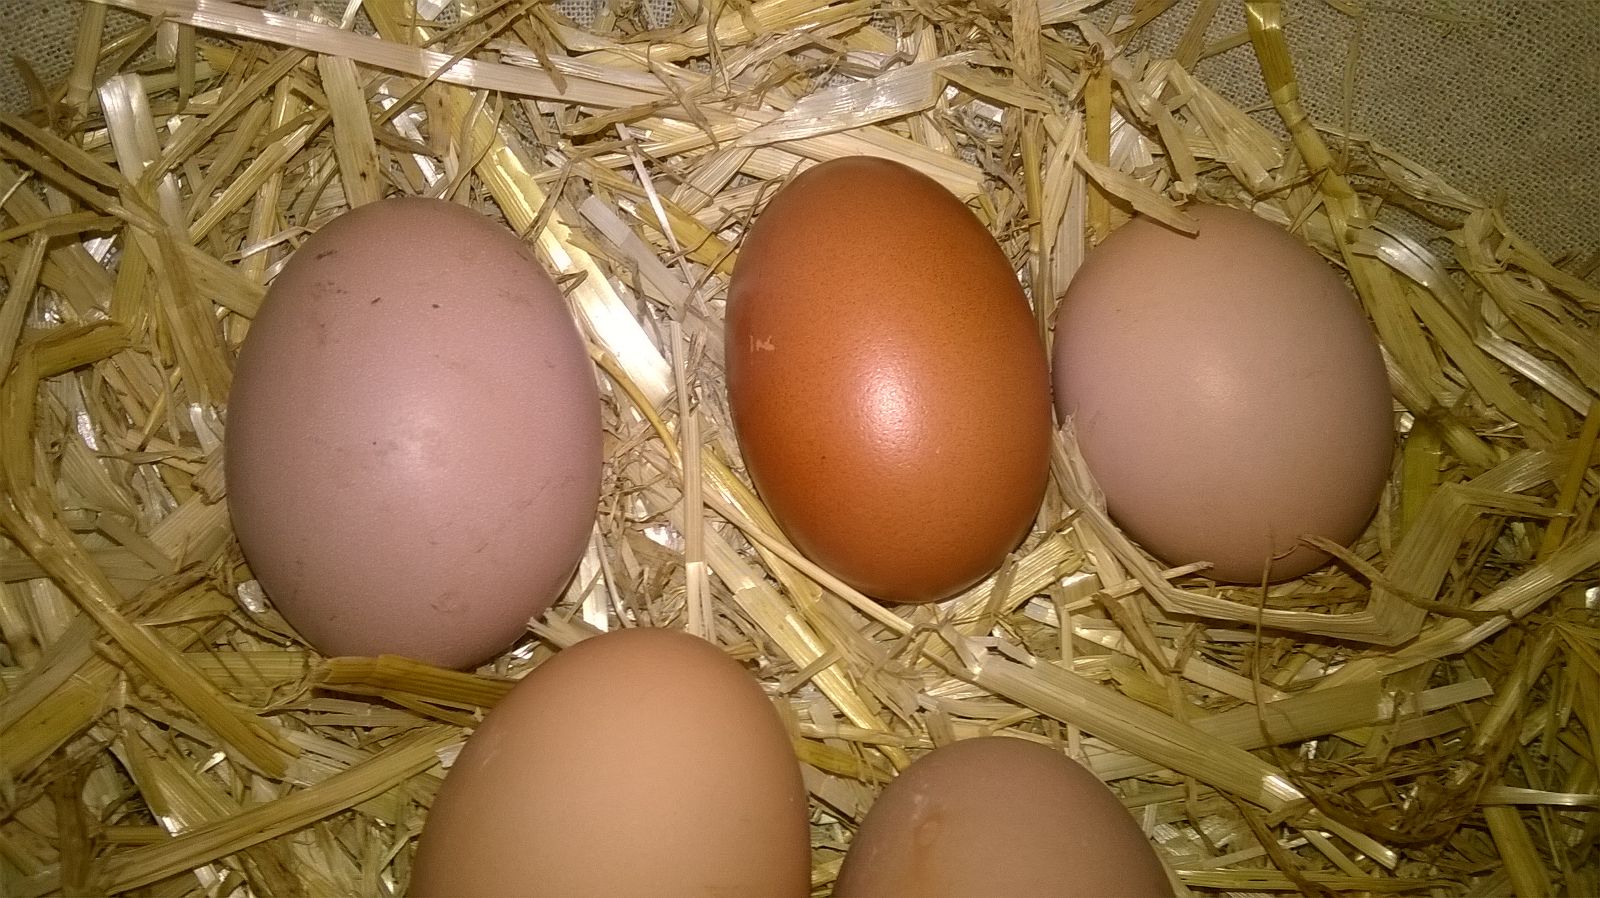 hi everyone
                     this dark egg is the first from gertrude my copper
black maran  the round one is lulus my rhode island red
the others are from meg my light sussex and hattie my silver
sussex made up 
                                        good luck